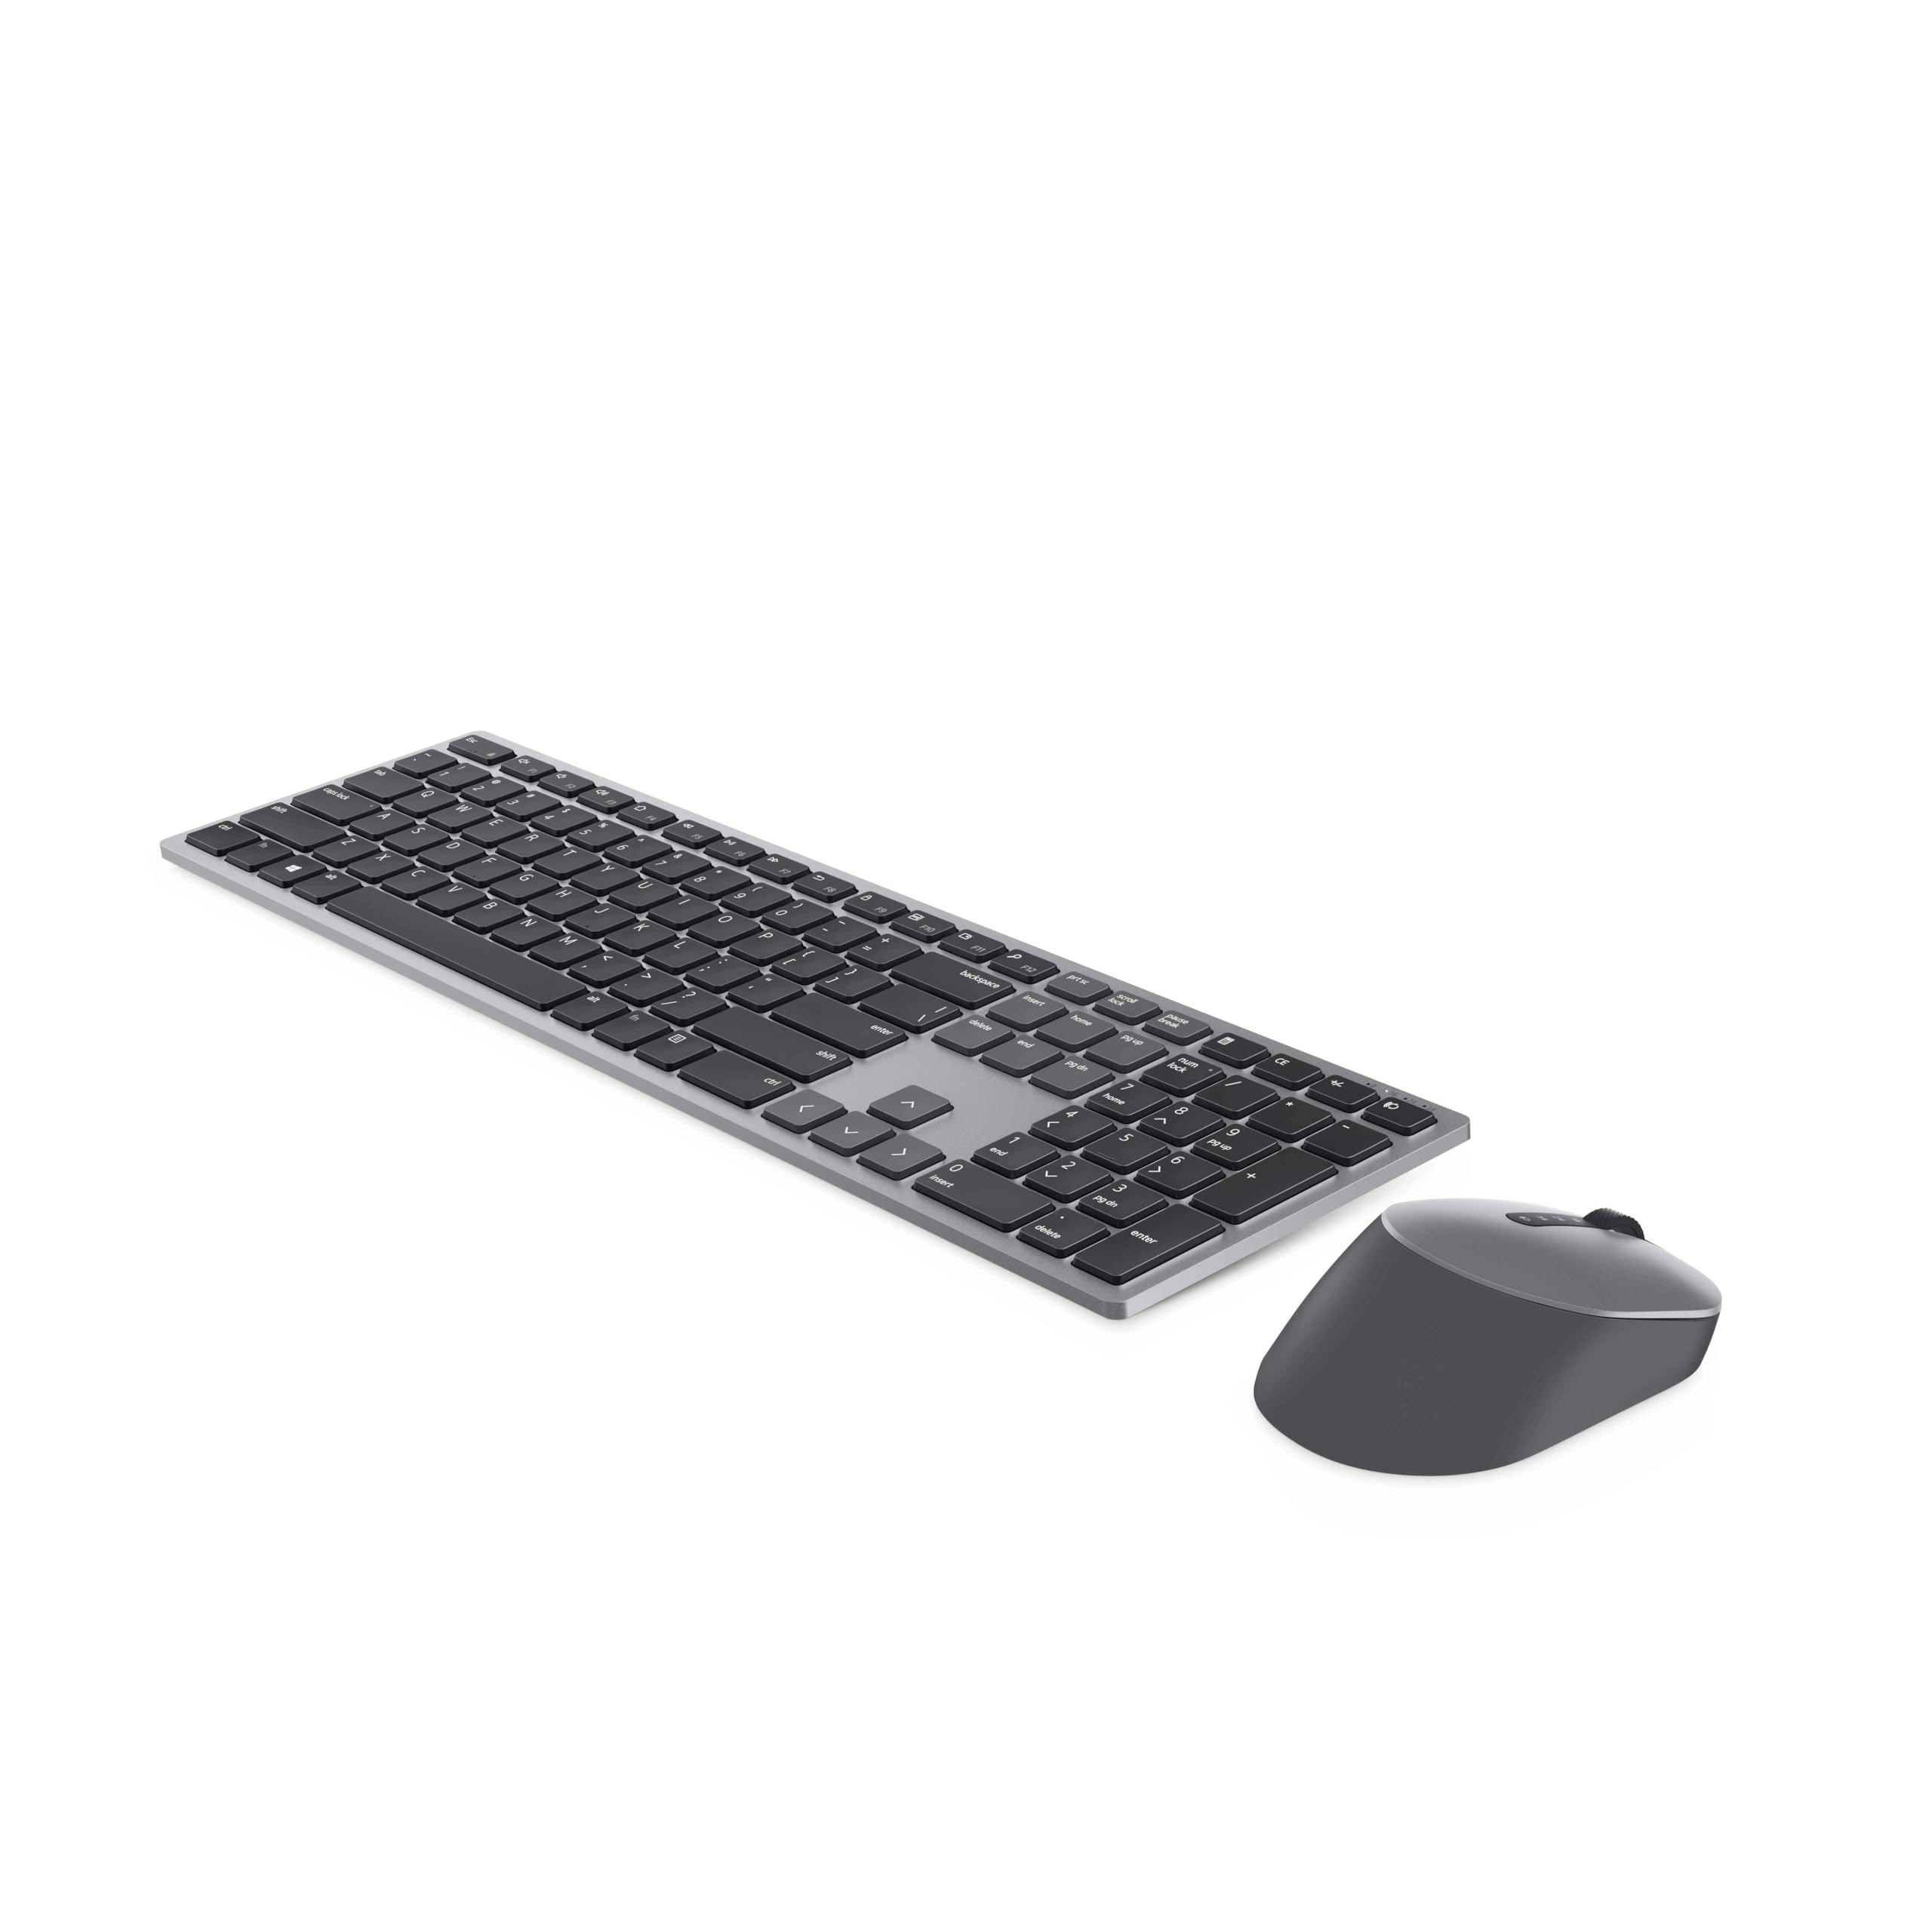 Dell KM7321W Premier Multi-Device Wireless Keyboard and Mouse, UK (QWERTY), 2.4GHz, Bluetooth 5.0, 128-bit AES Encryption, 4000 dpi, Compatible with Windows, Mac, Linux, Chrome and Android, (Grey)